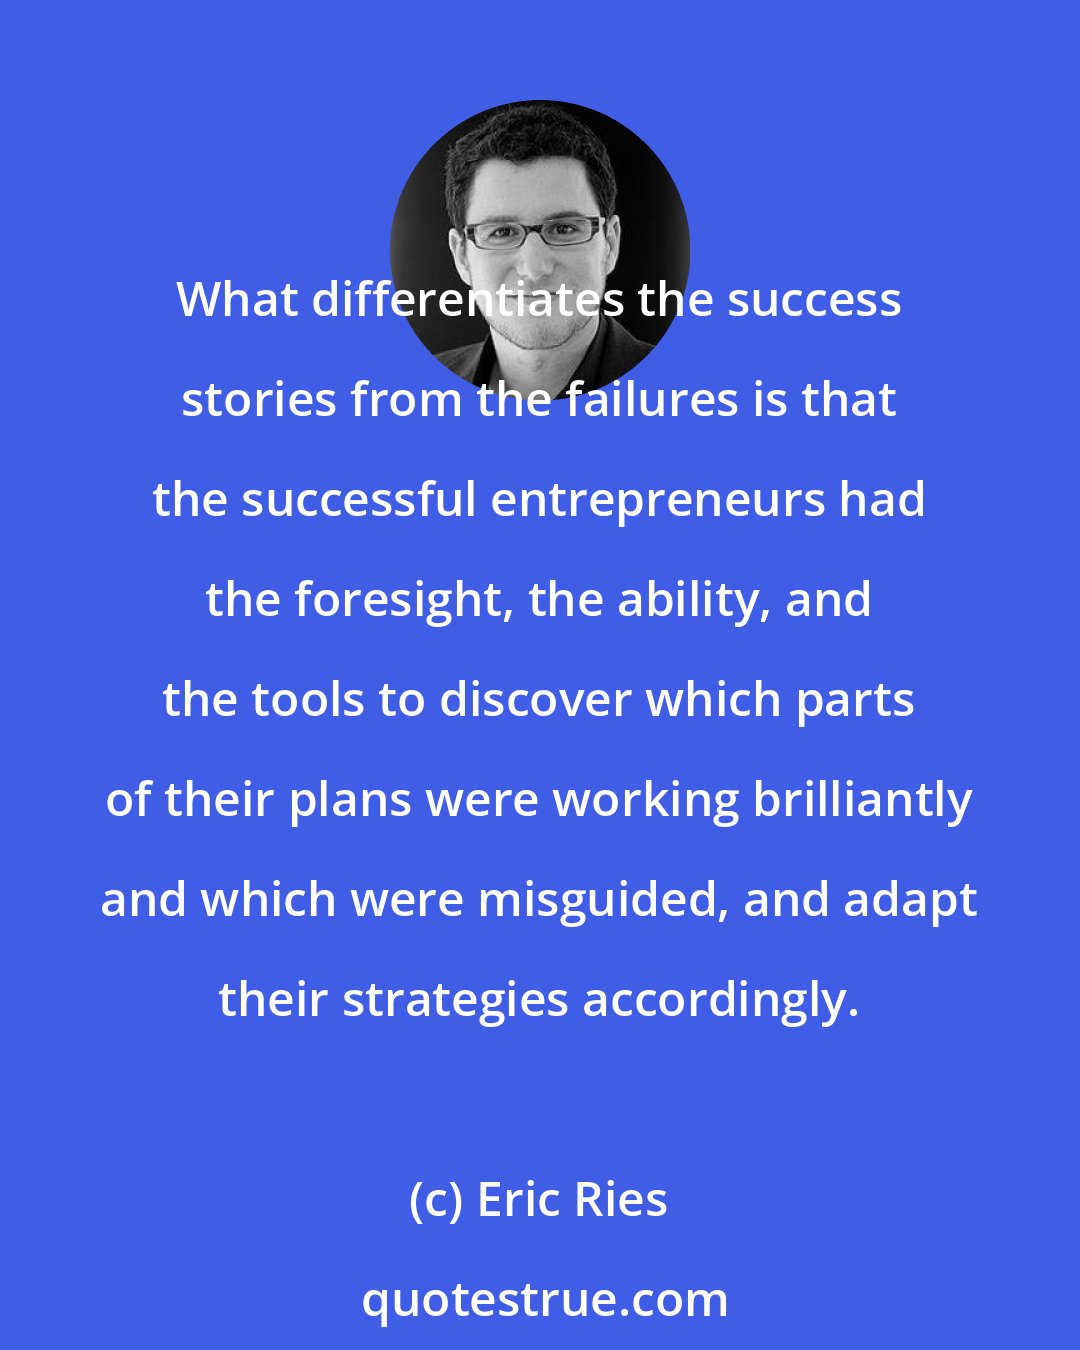 Eric Ries: What differentiates the success stories from the failures is that the successful entrepreneurs had the foresight, the ability, and the tools to discover which parts of their plans were working brilliantly and which were misguided, and adapt their strategies accordingly.